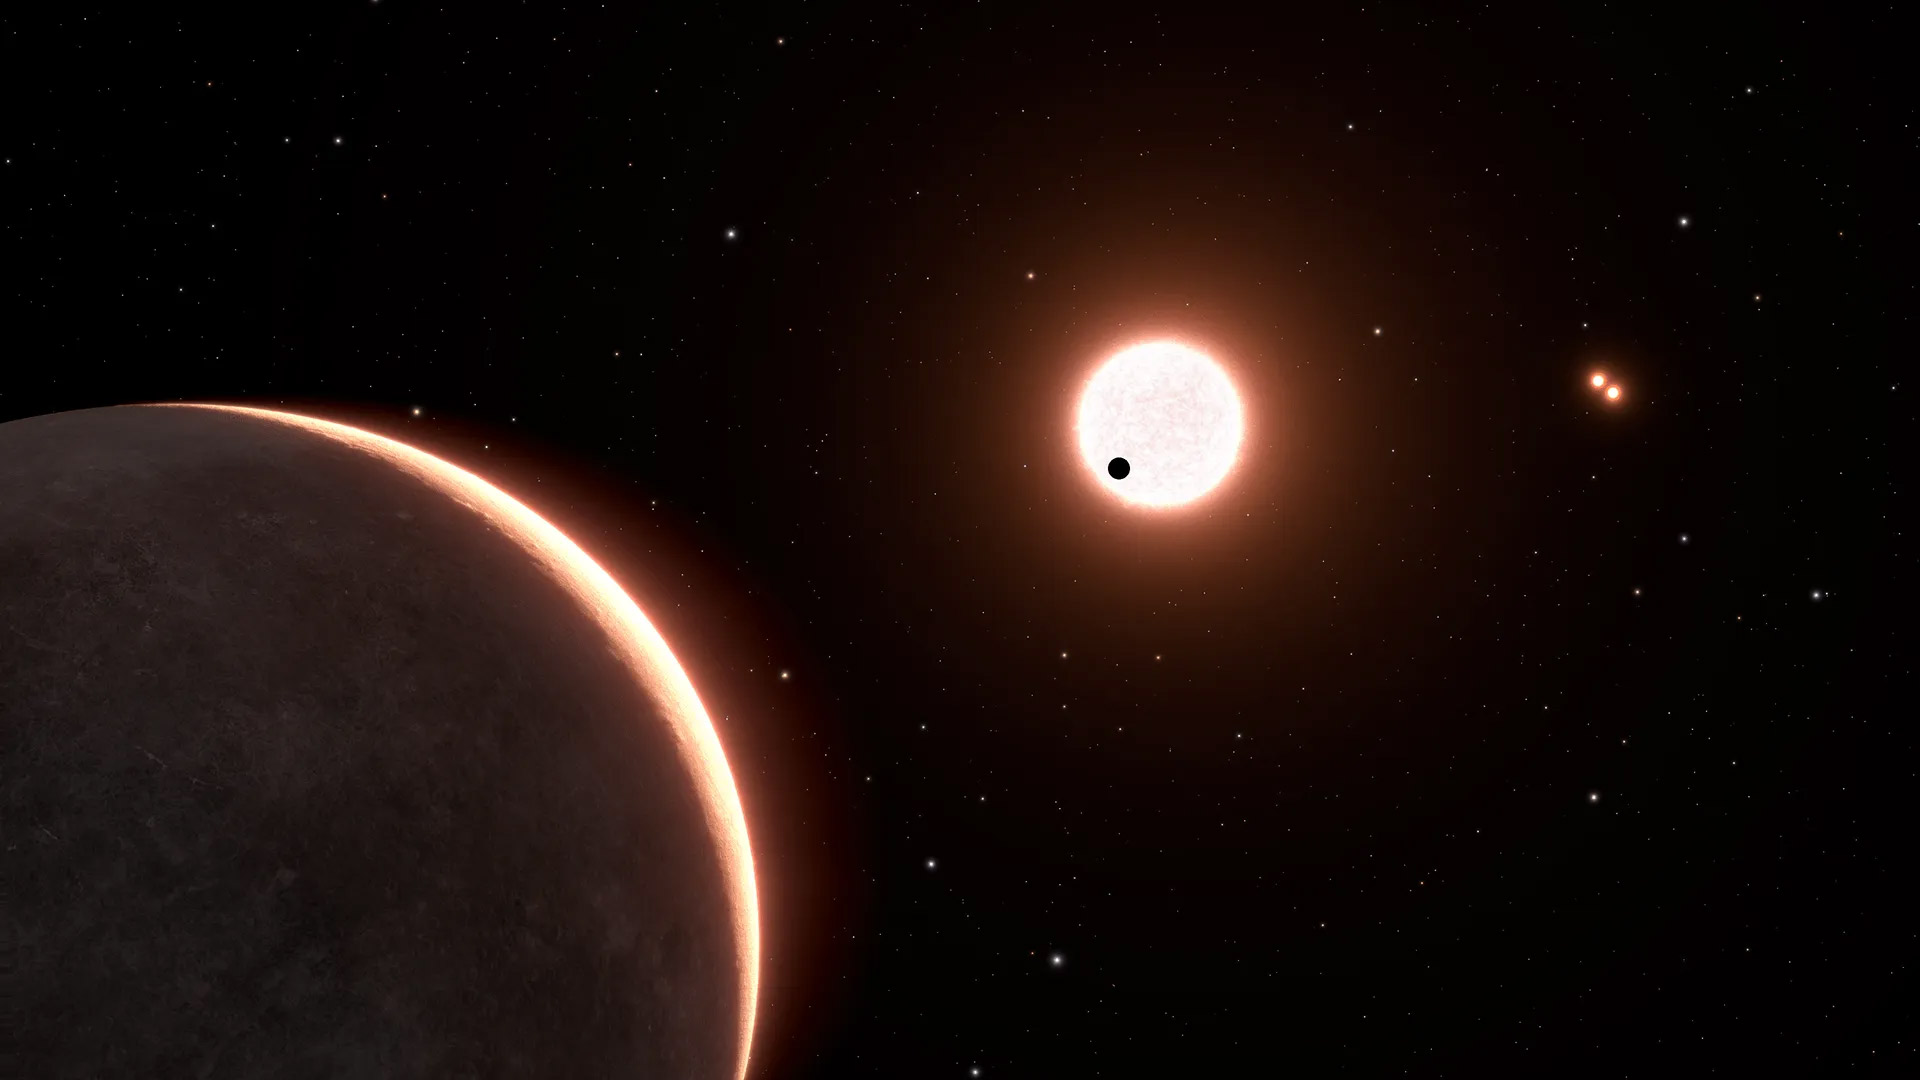 concept of the exoplanet LTT 1445Ac